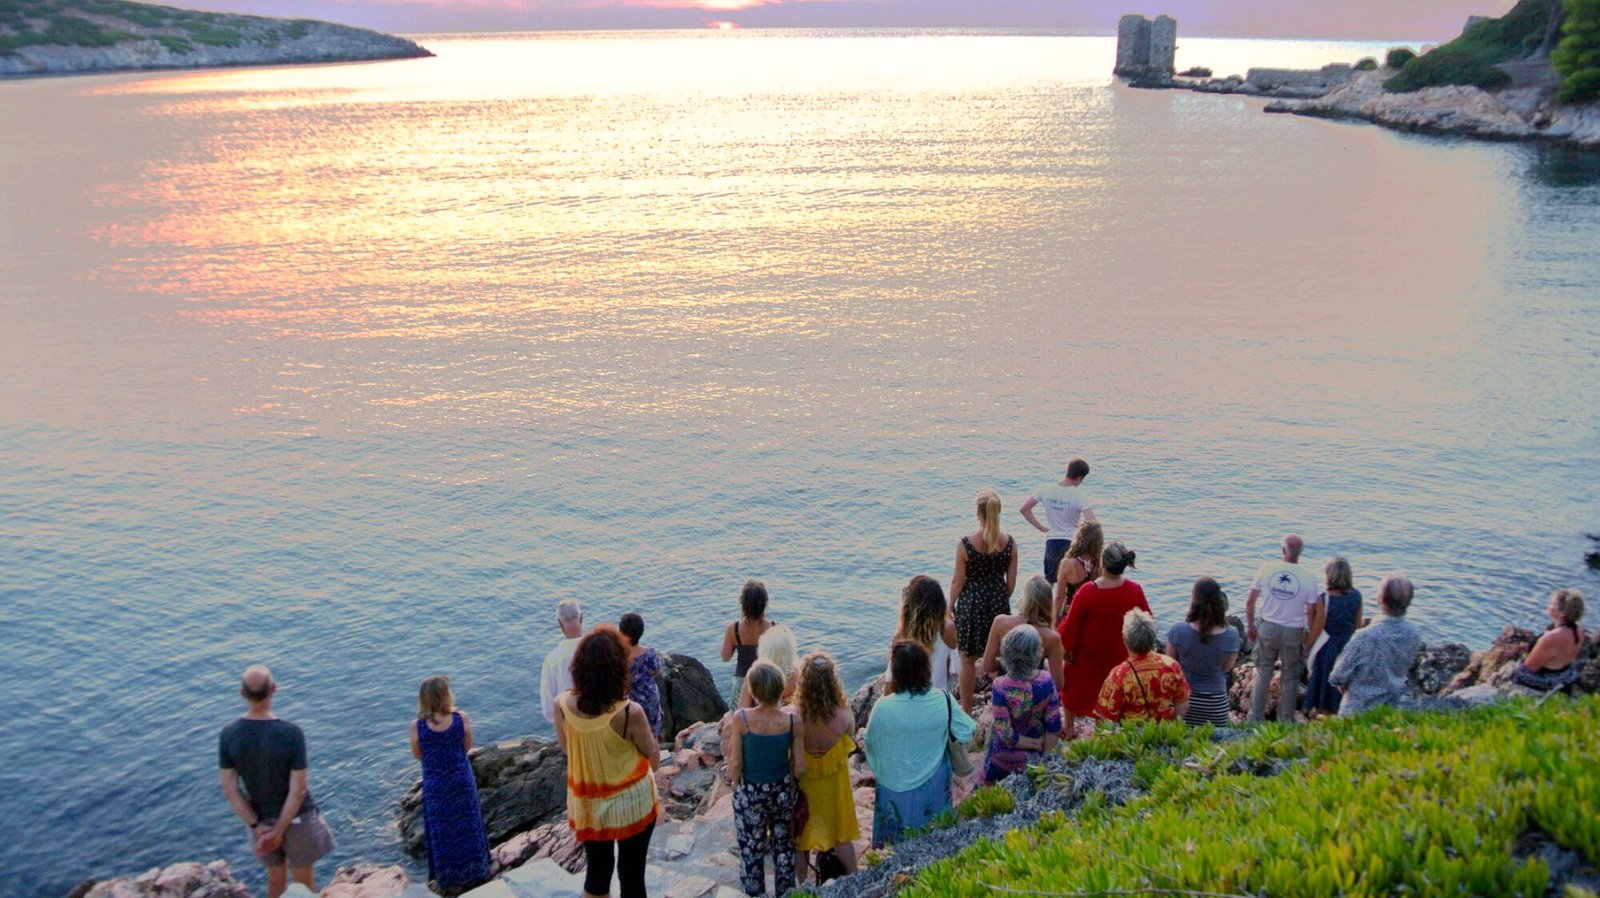 Meditation group watching towards the ocean in sunset scene